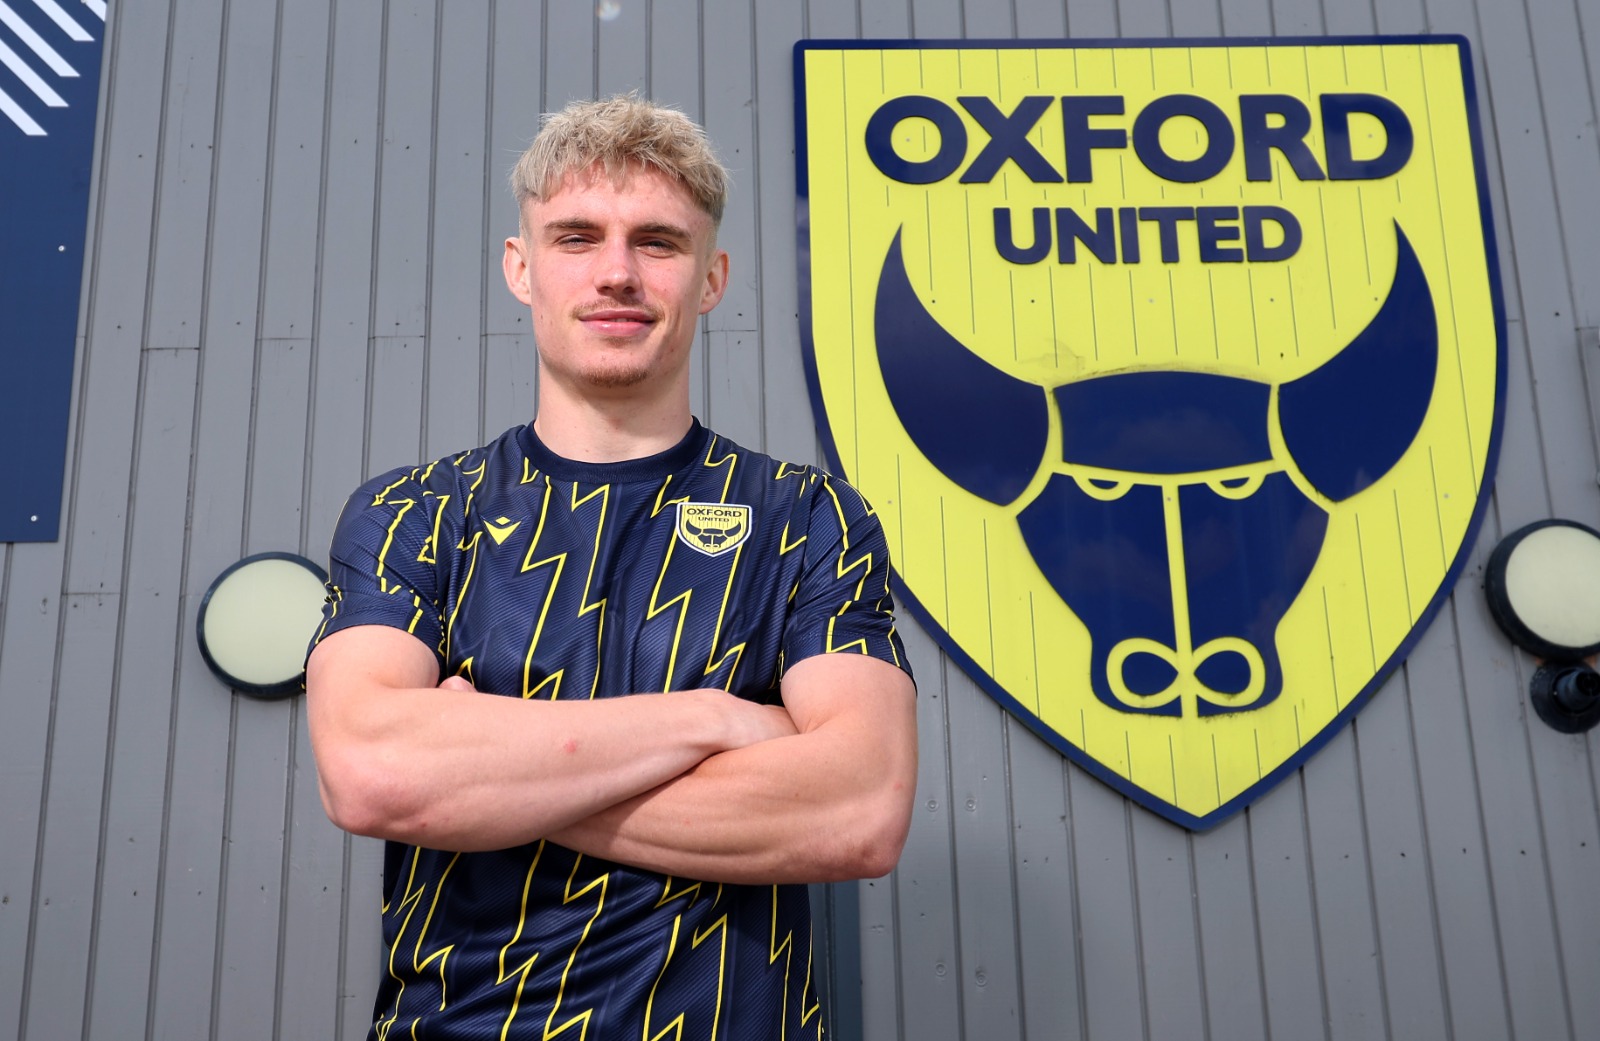 Oxford United and Poland international winger on playing style